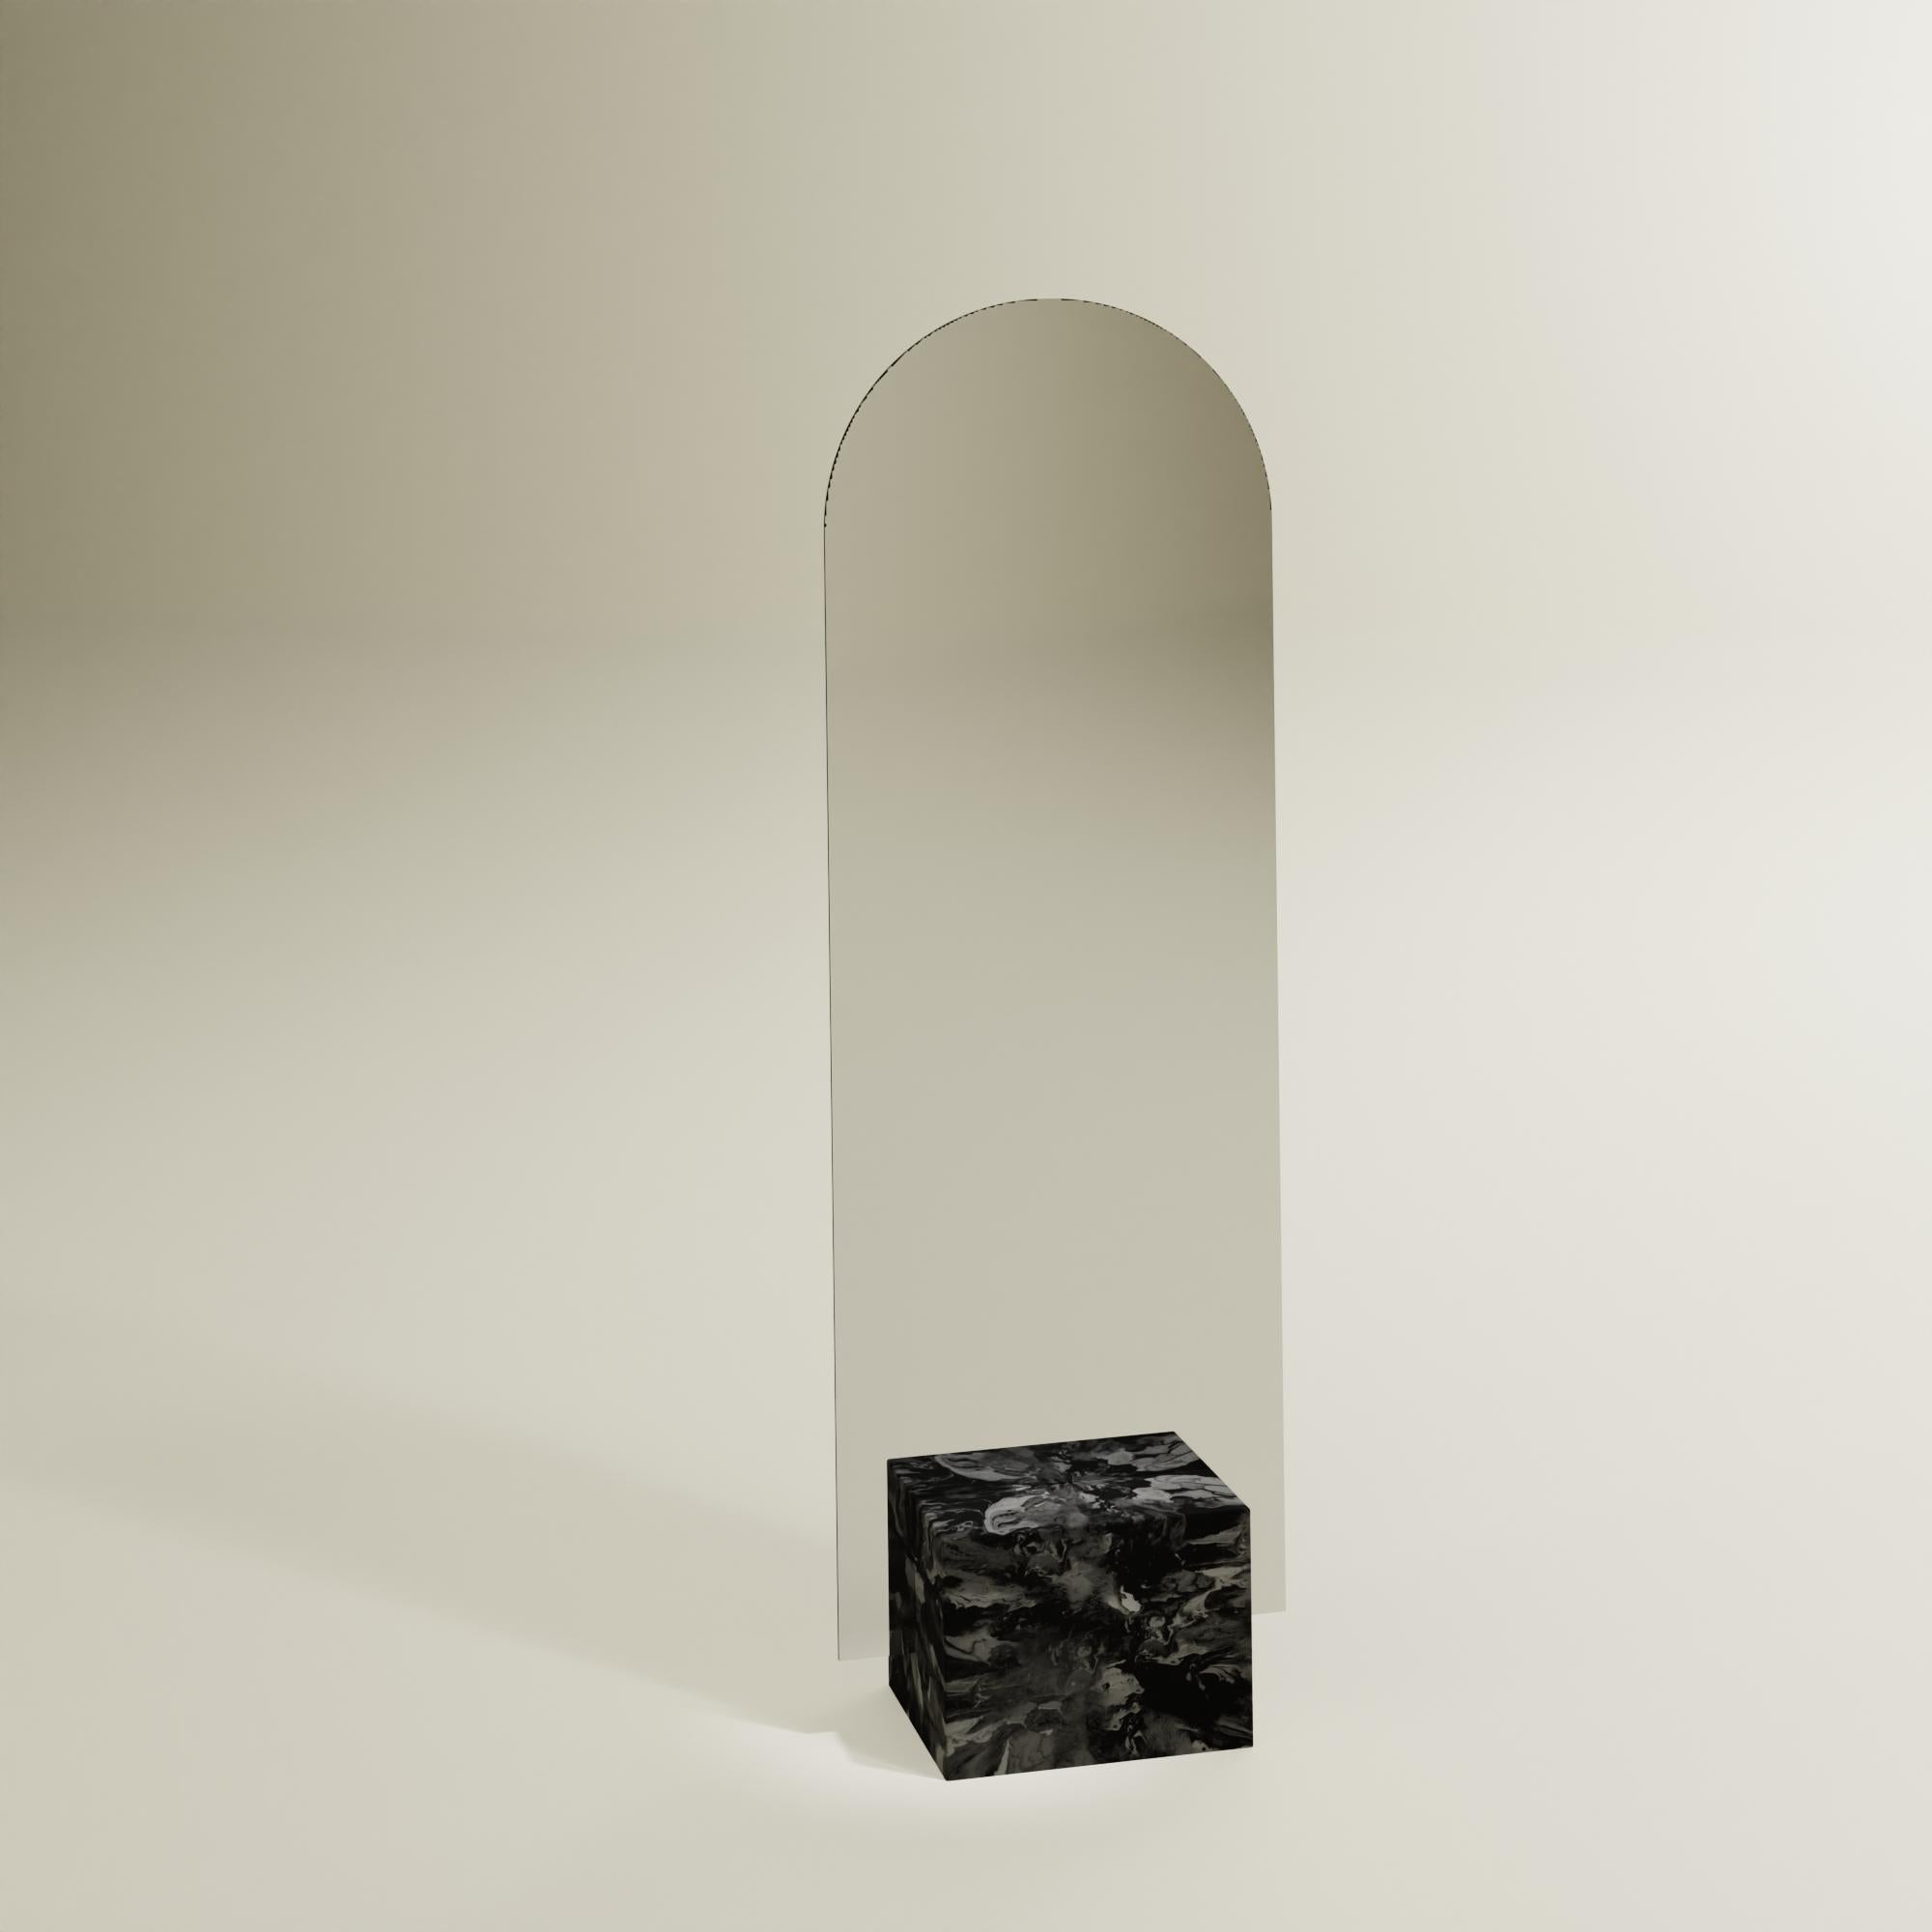 Contemporary black standing mirror hand crafted from 100% Recycled Plastic by Anqa Studios.
With its stone-like bottom and the fragile seeming top part silhouette, the ANQA Moonrise mirror is a modern confluence of both art and function. This